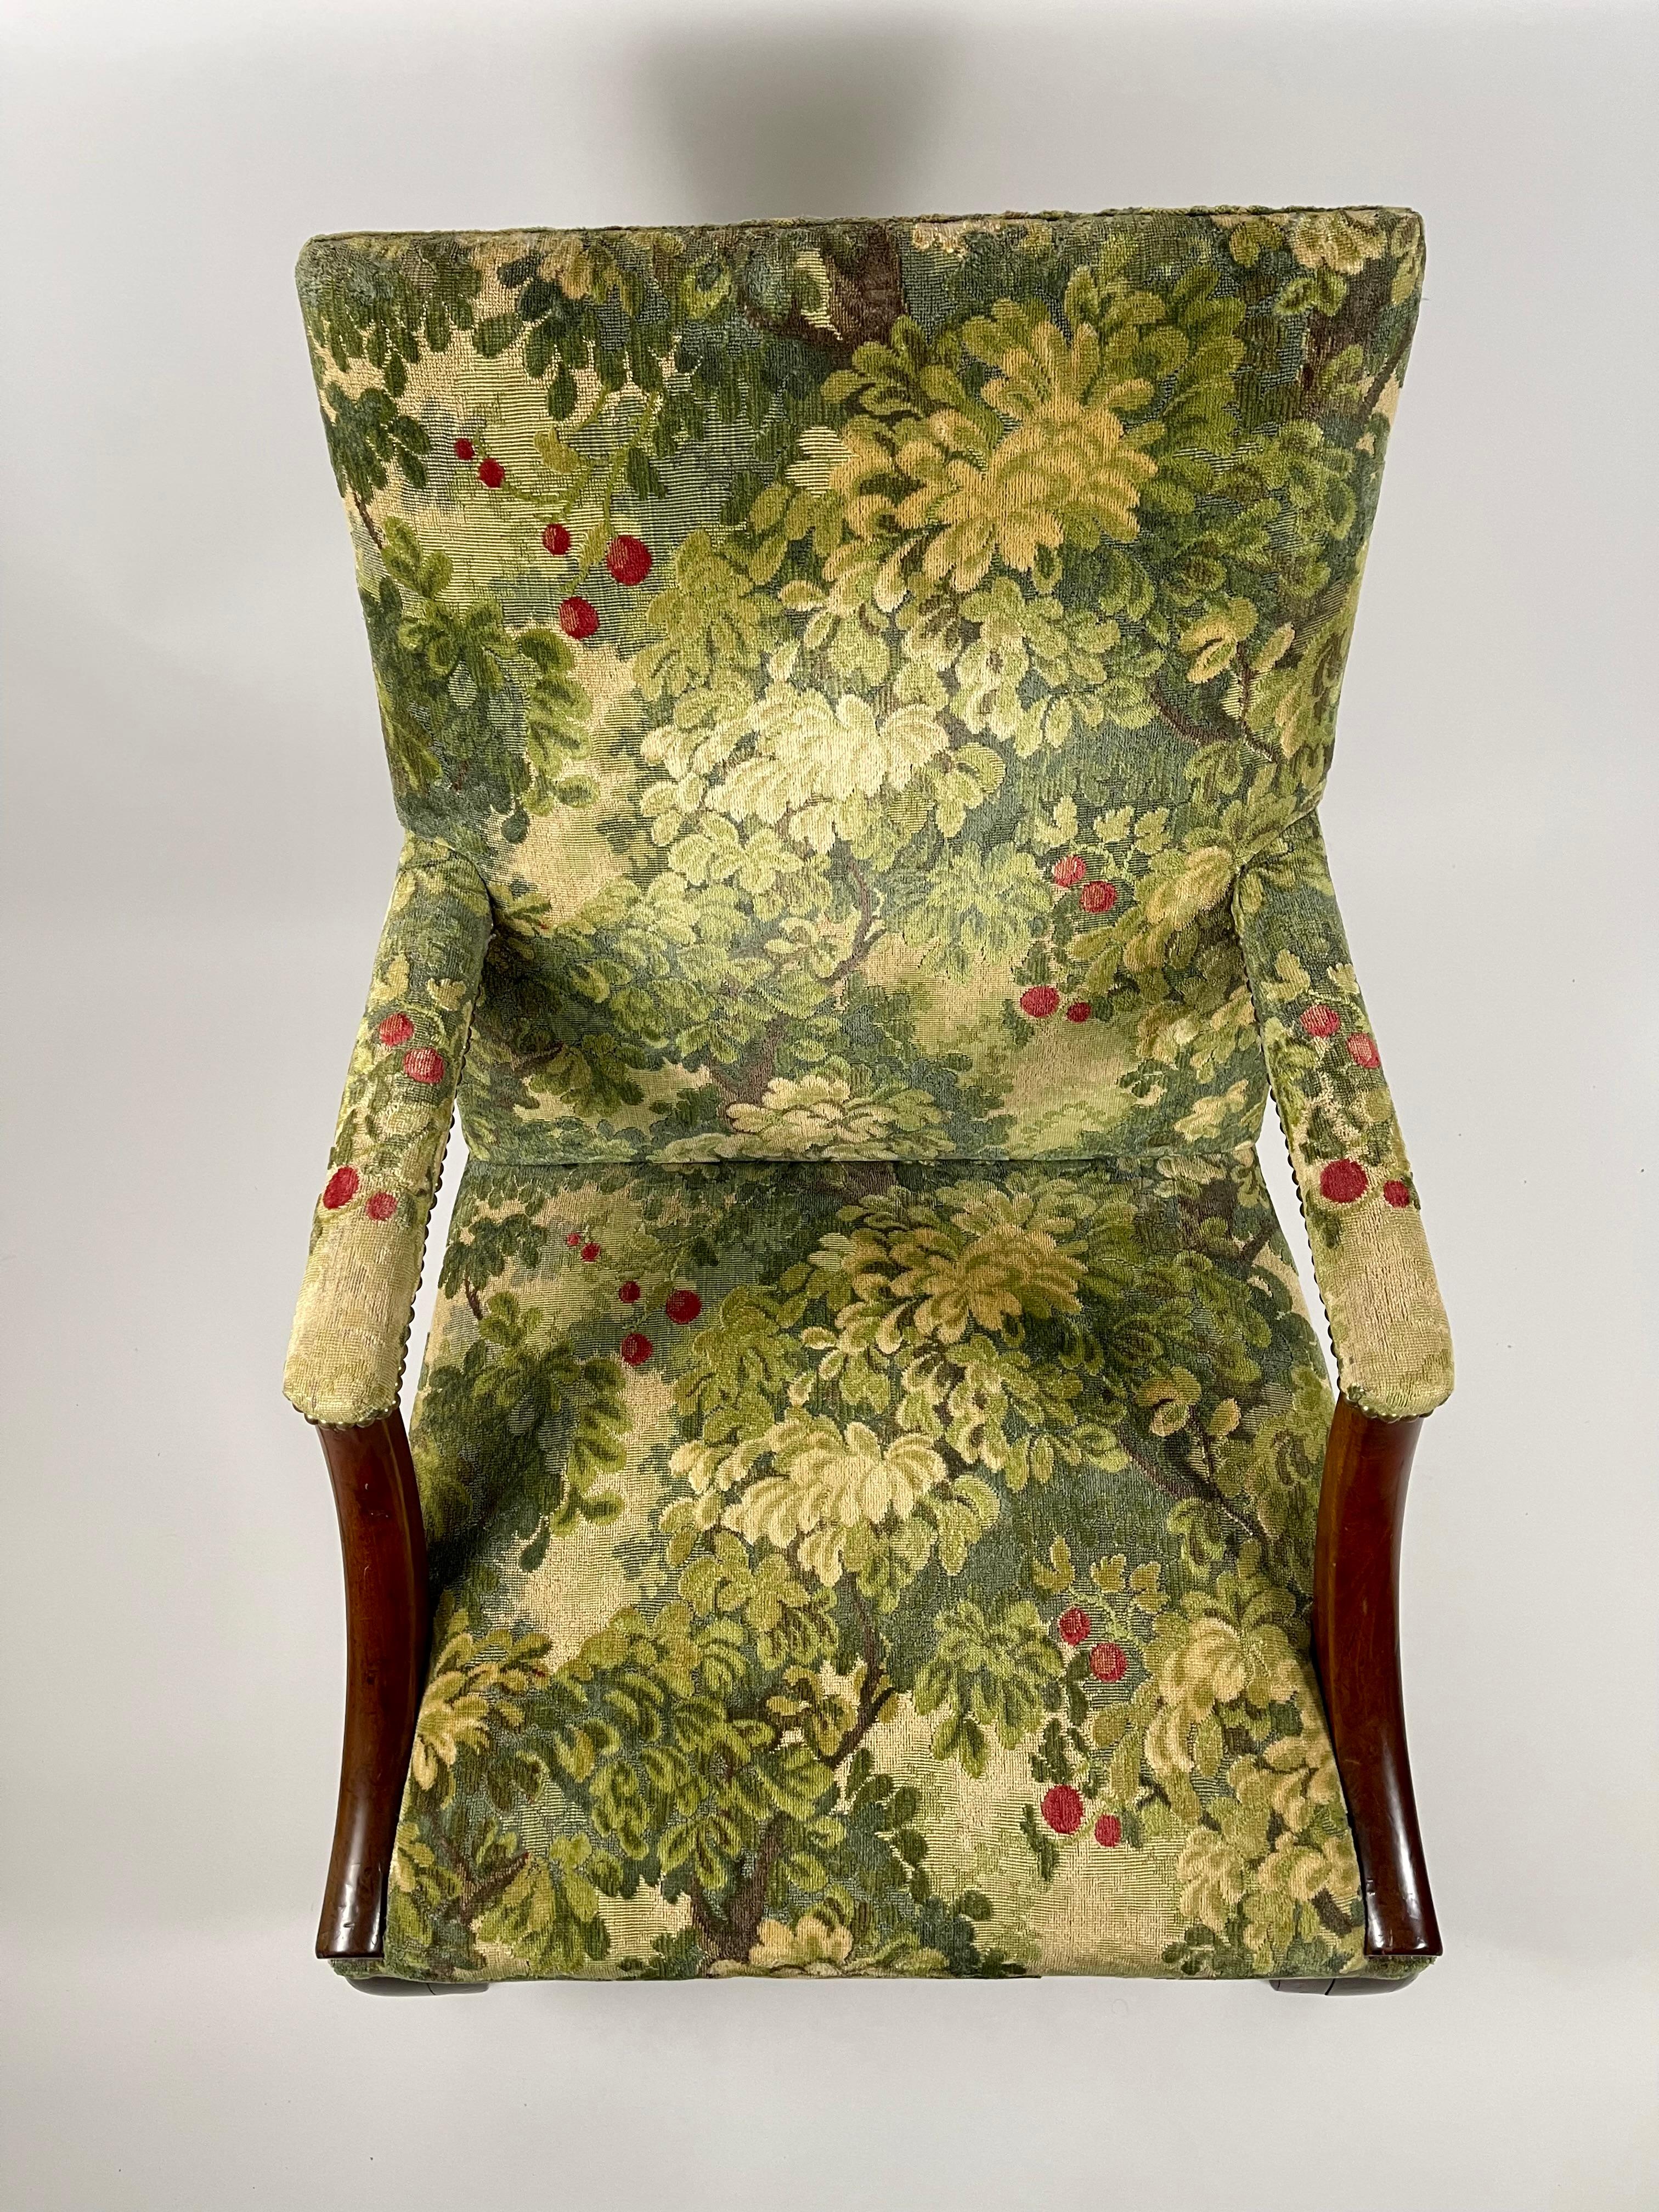 18th Century English Queen Anne Period Upholstered Arm Chair